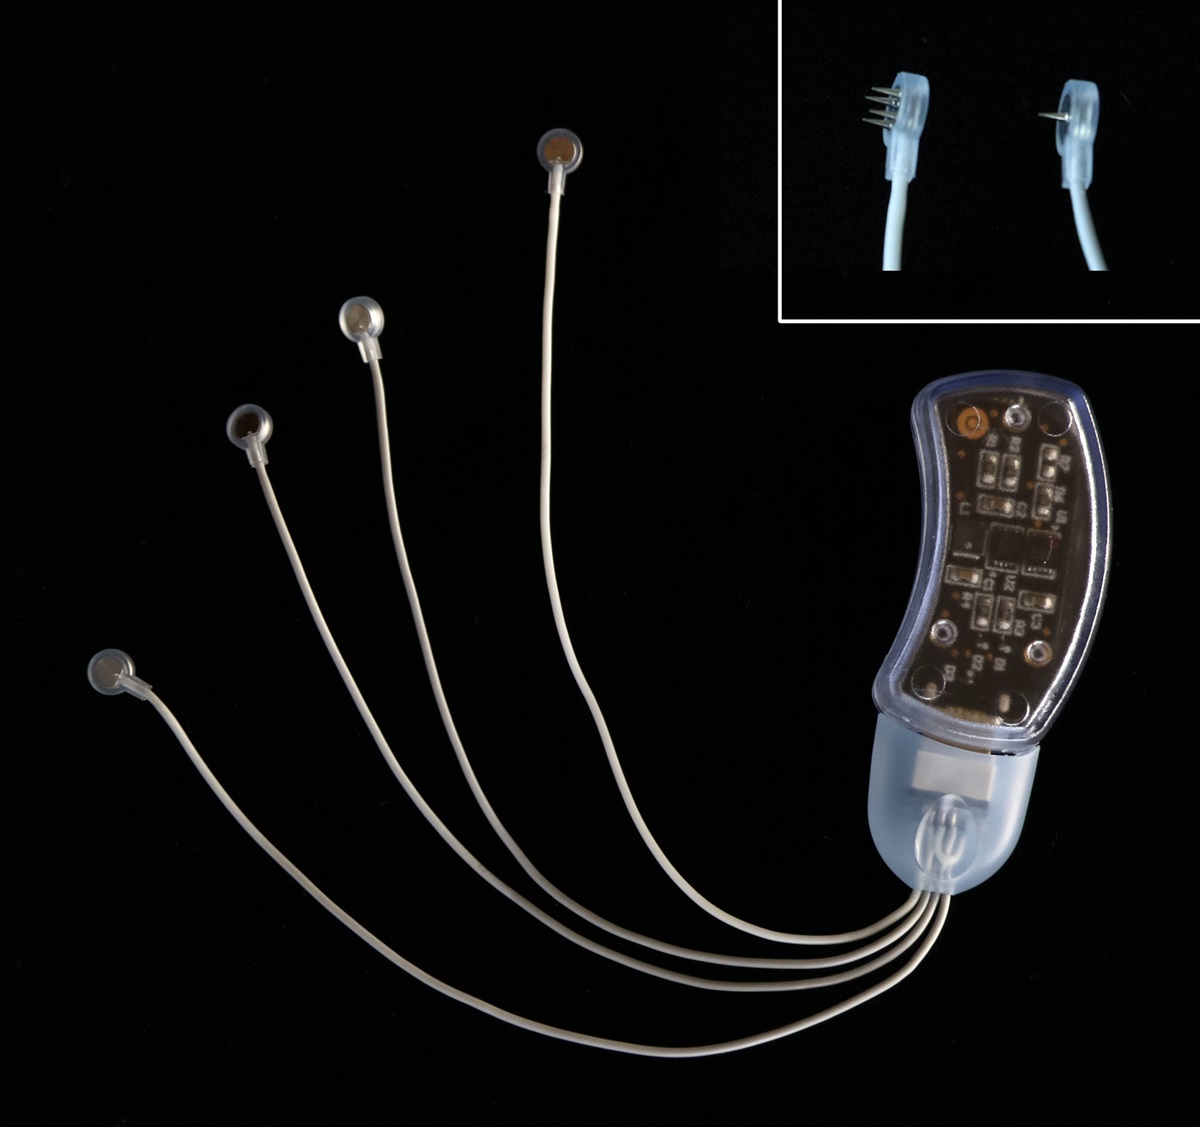 Percutaneous Auricular Nerve Stimulation (Neuromodulation) for Analgesia and Opioid-Sparing Following Knee and Hip Arthroplasty: A Proof-of-Concept Case Series